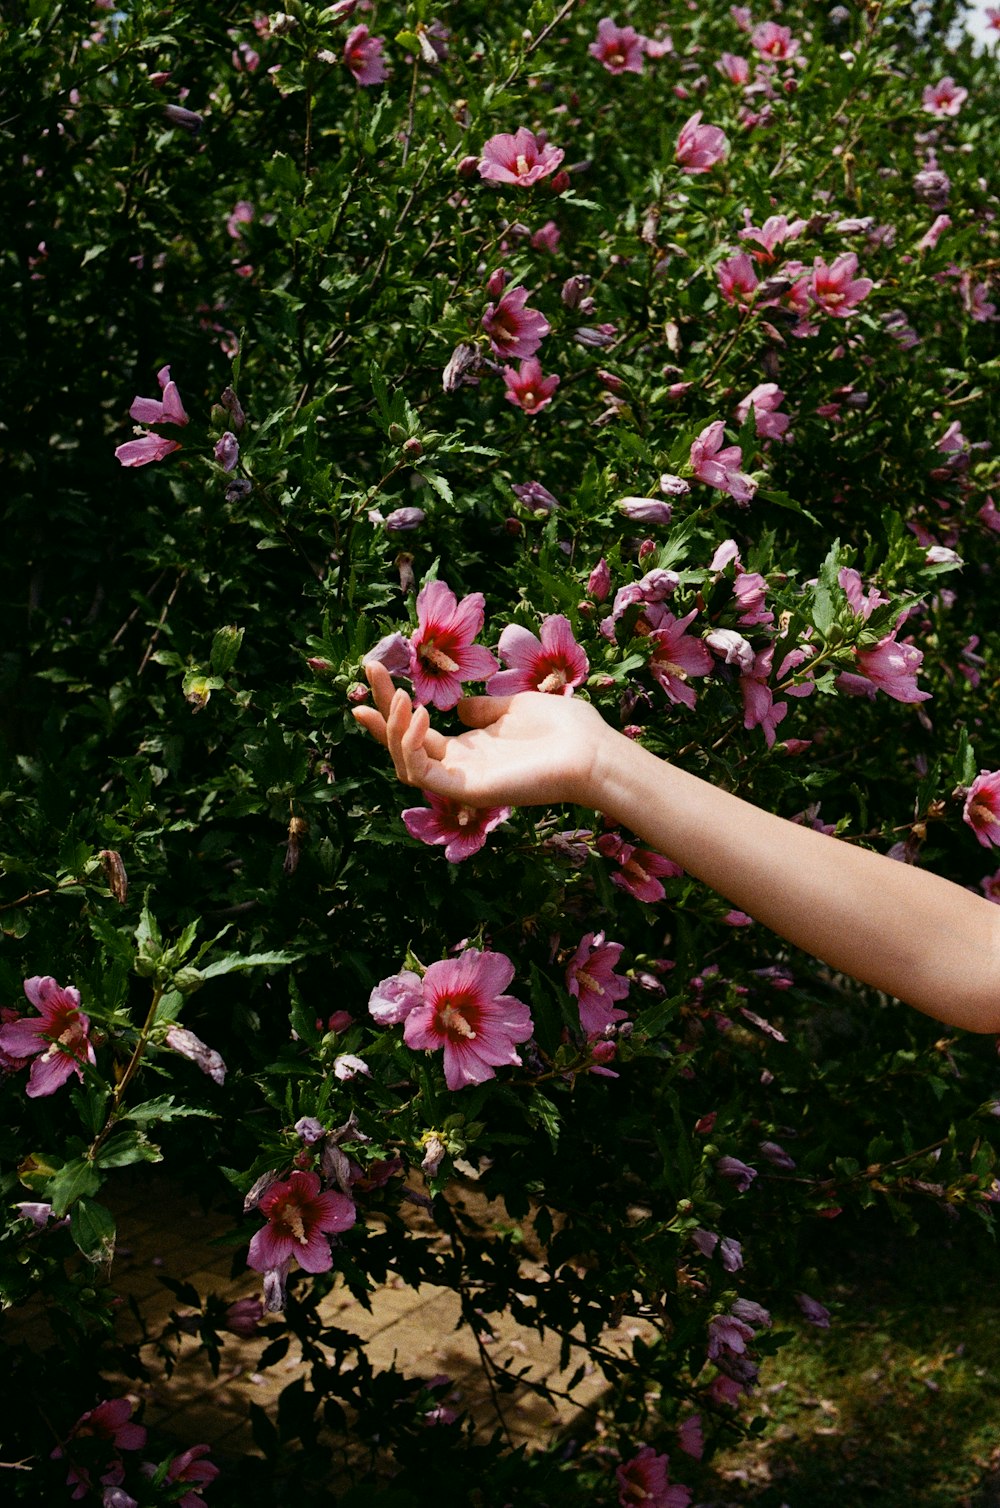 a hand reaching out towards a bush with pink flowers